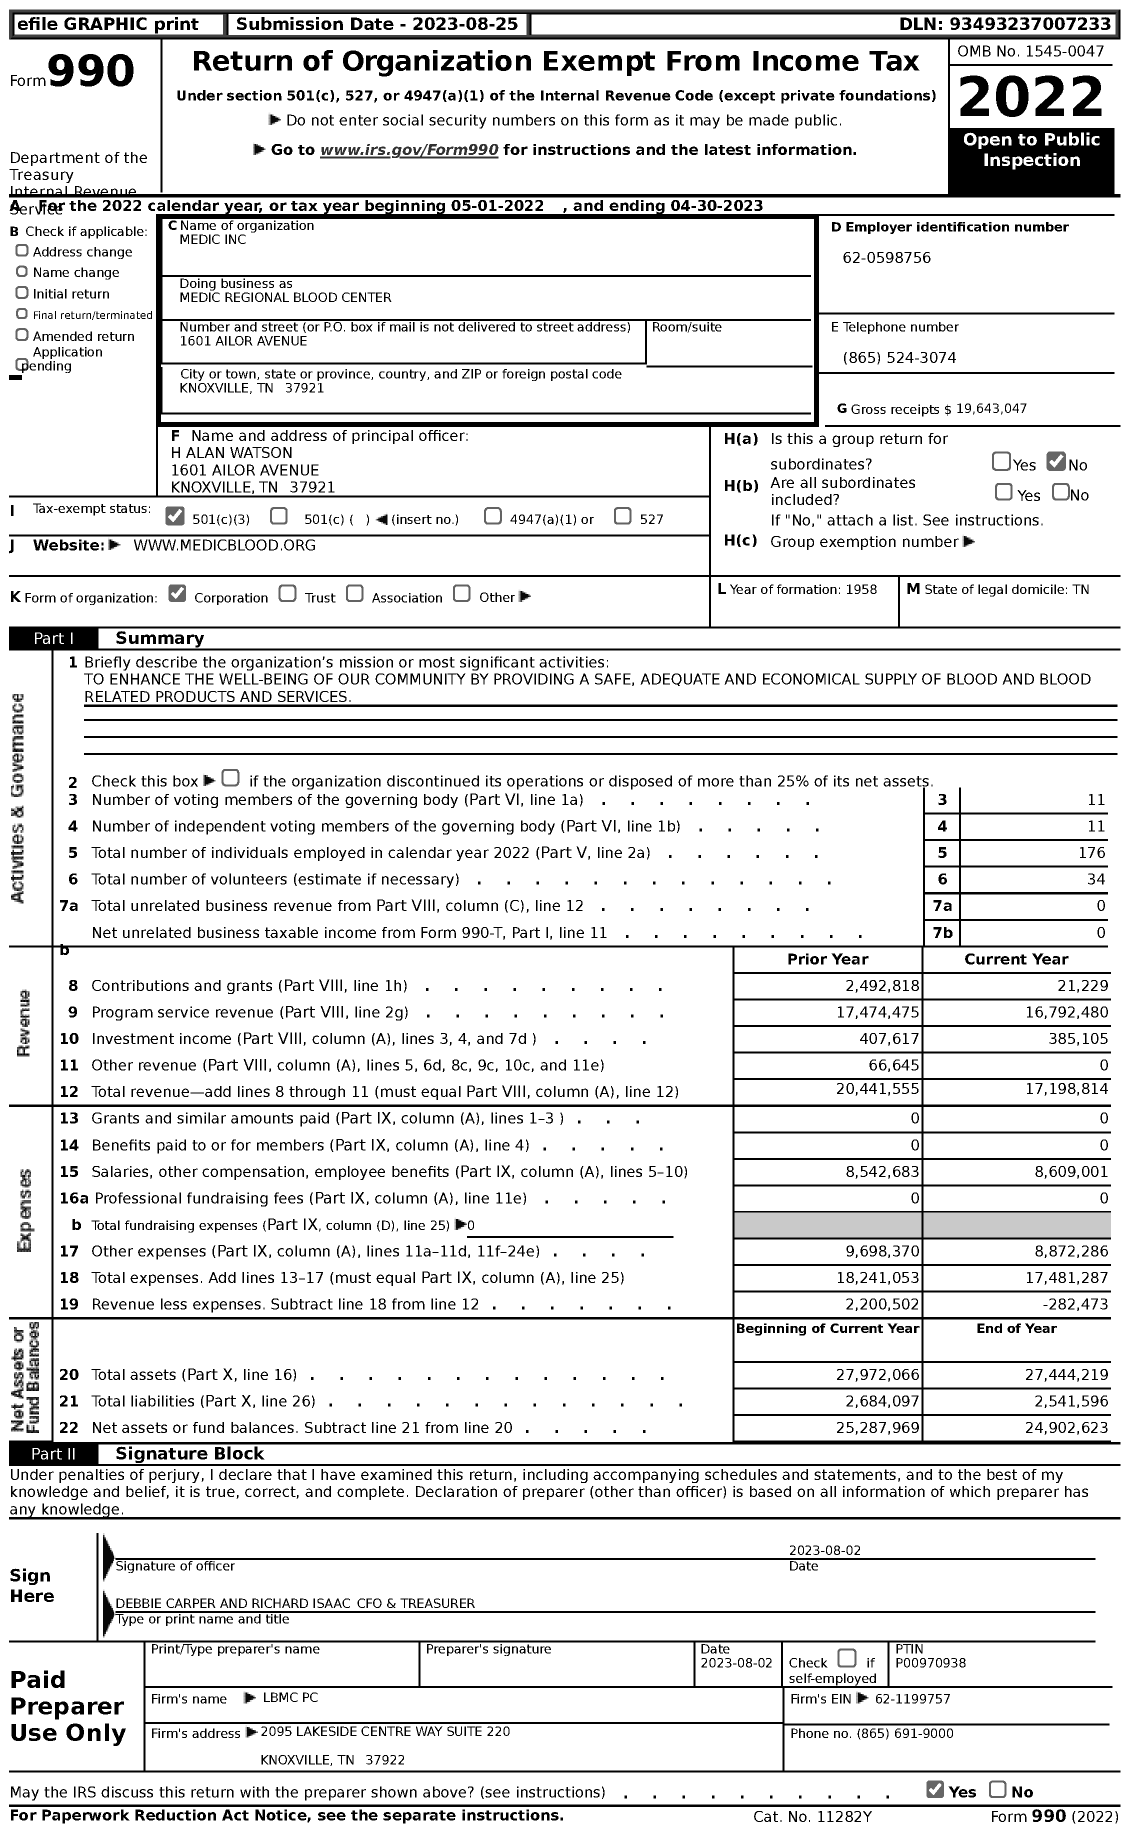 Image of first page of 2022 Form 990 for MEDIC Regional Blood Center